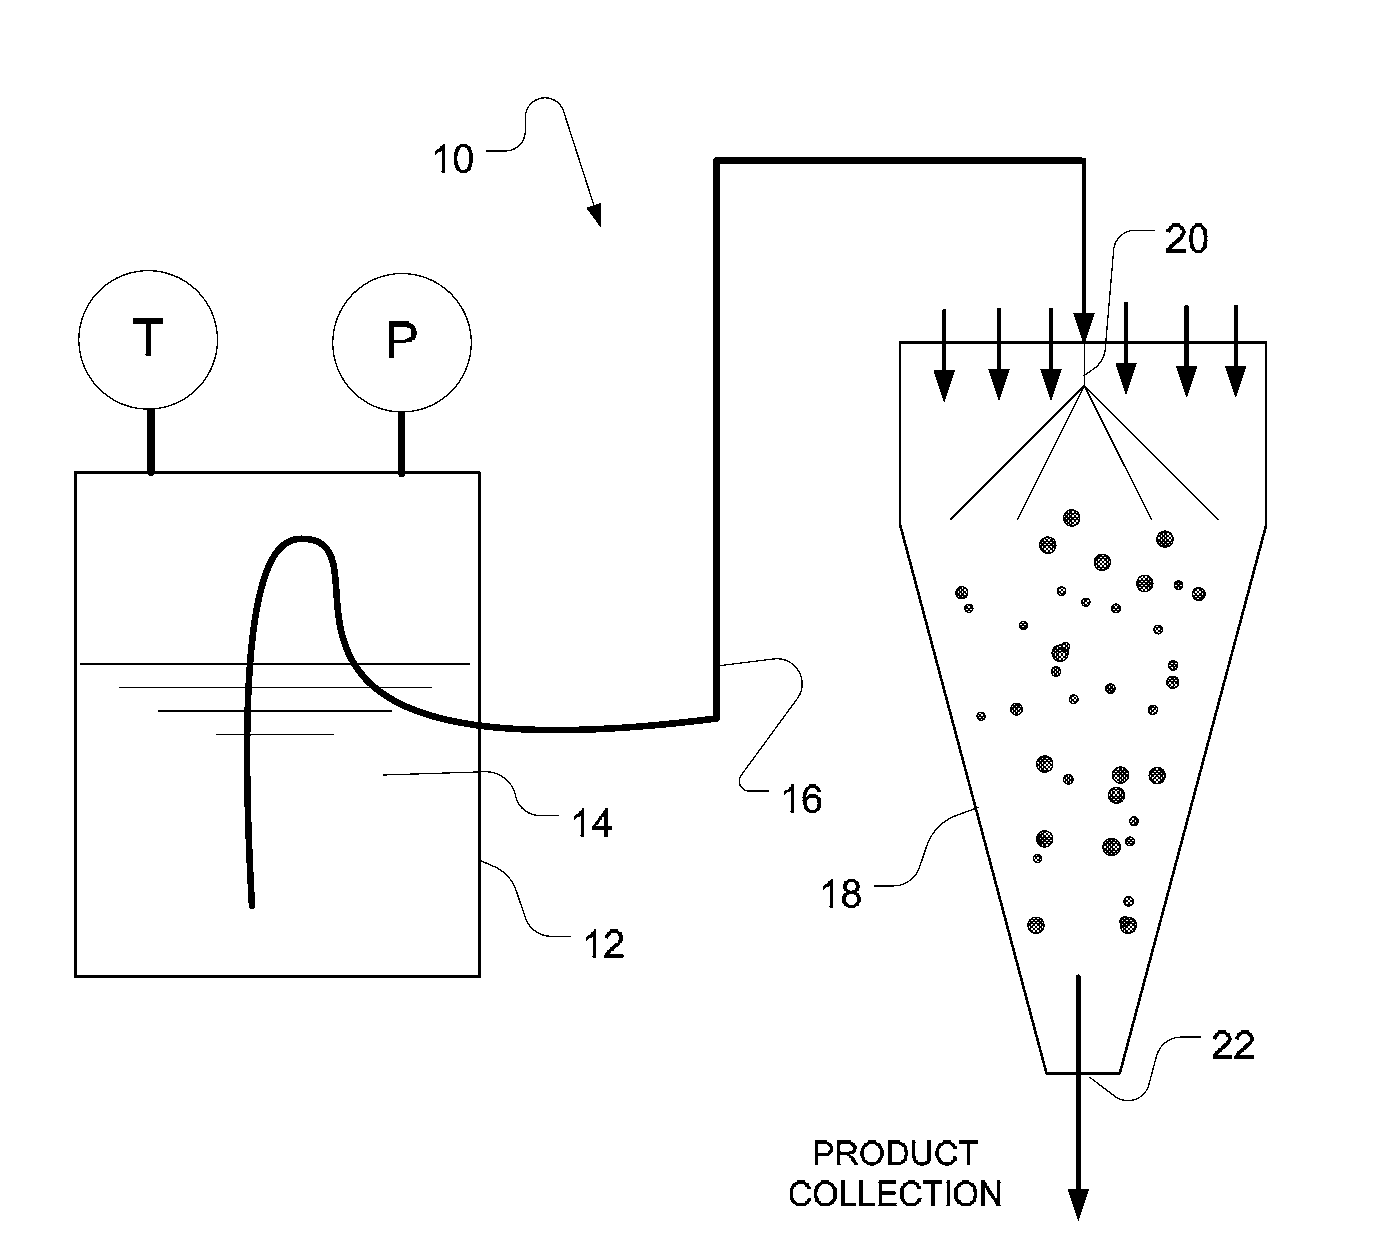 Formulation process method to produce spray dried products